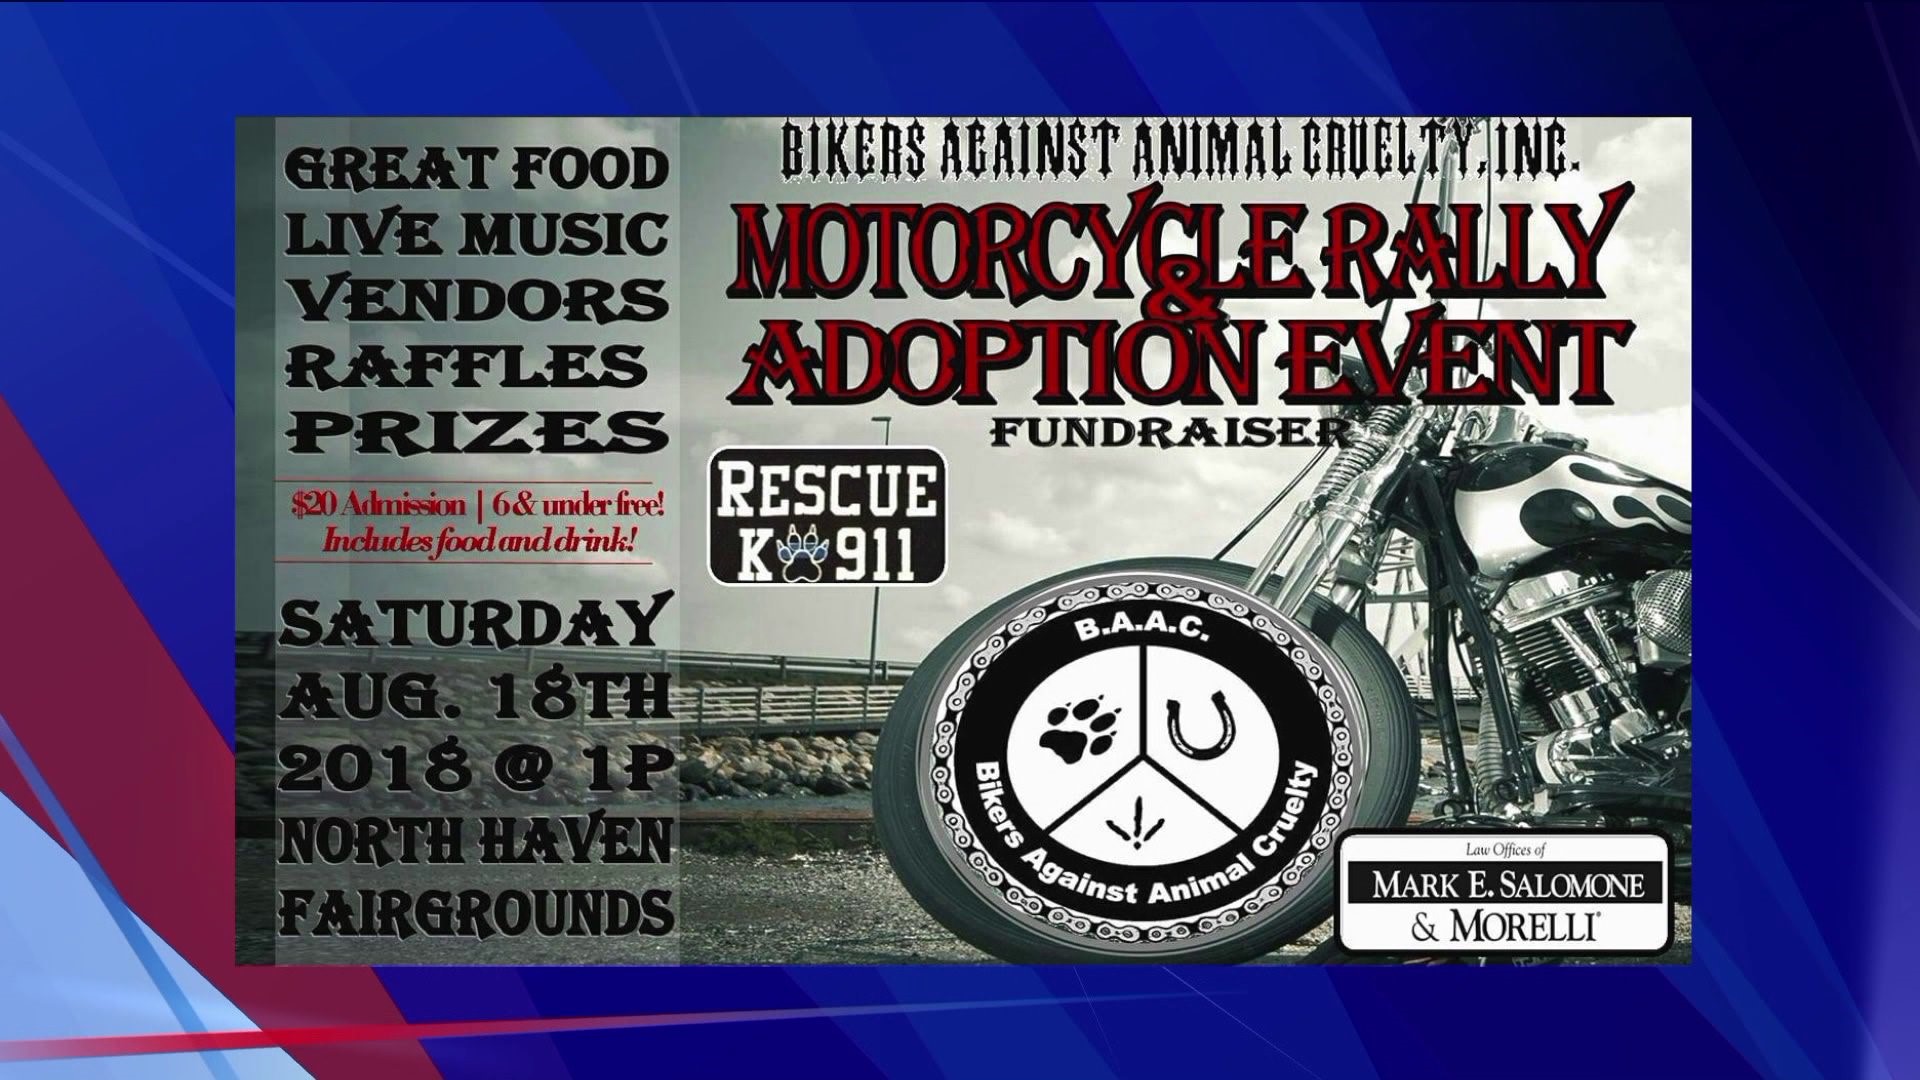 Bikers fighting animal abuse to host annual rally Aug. 18 